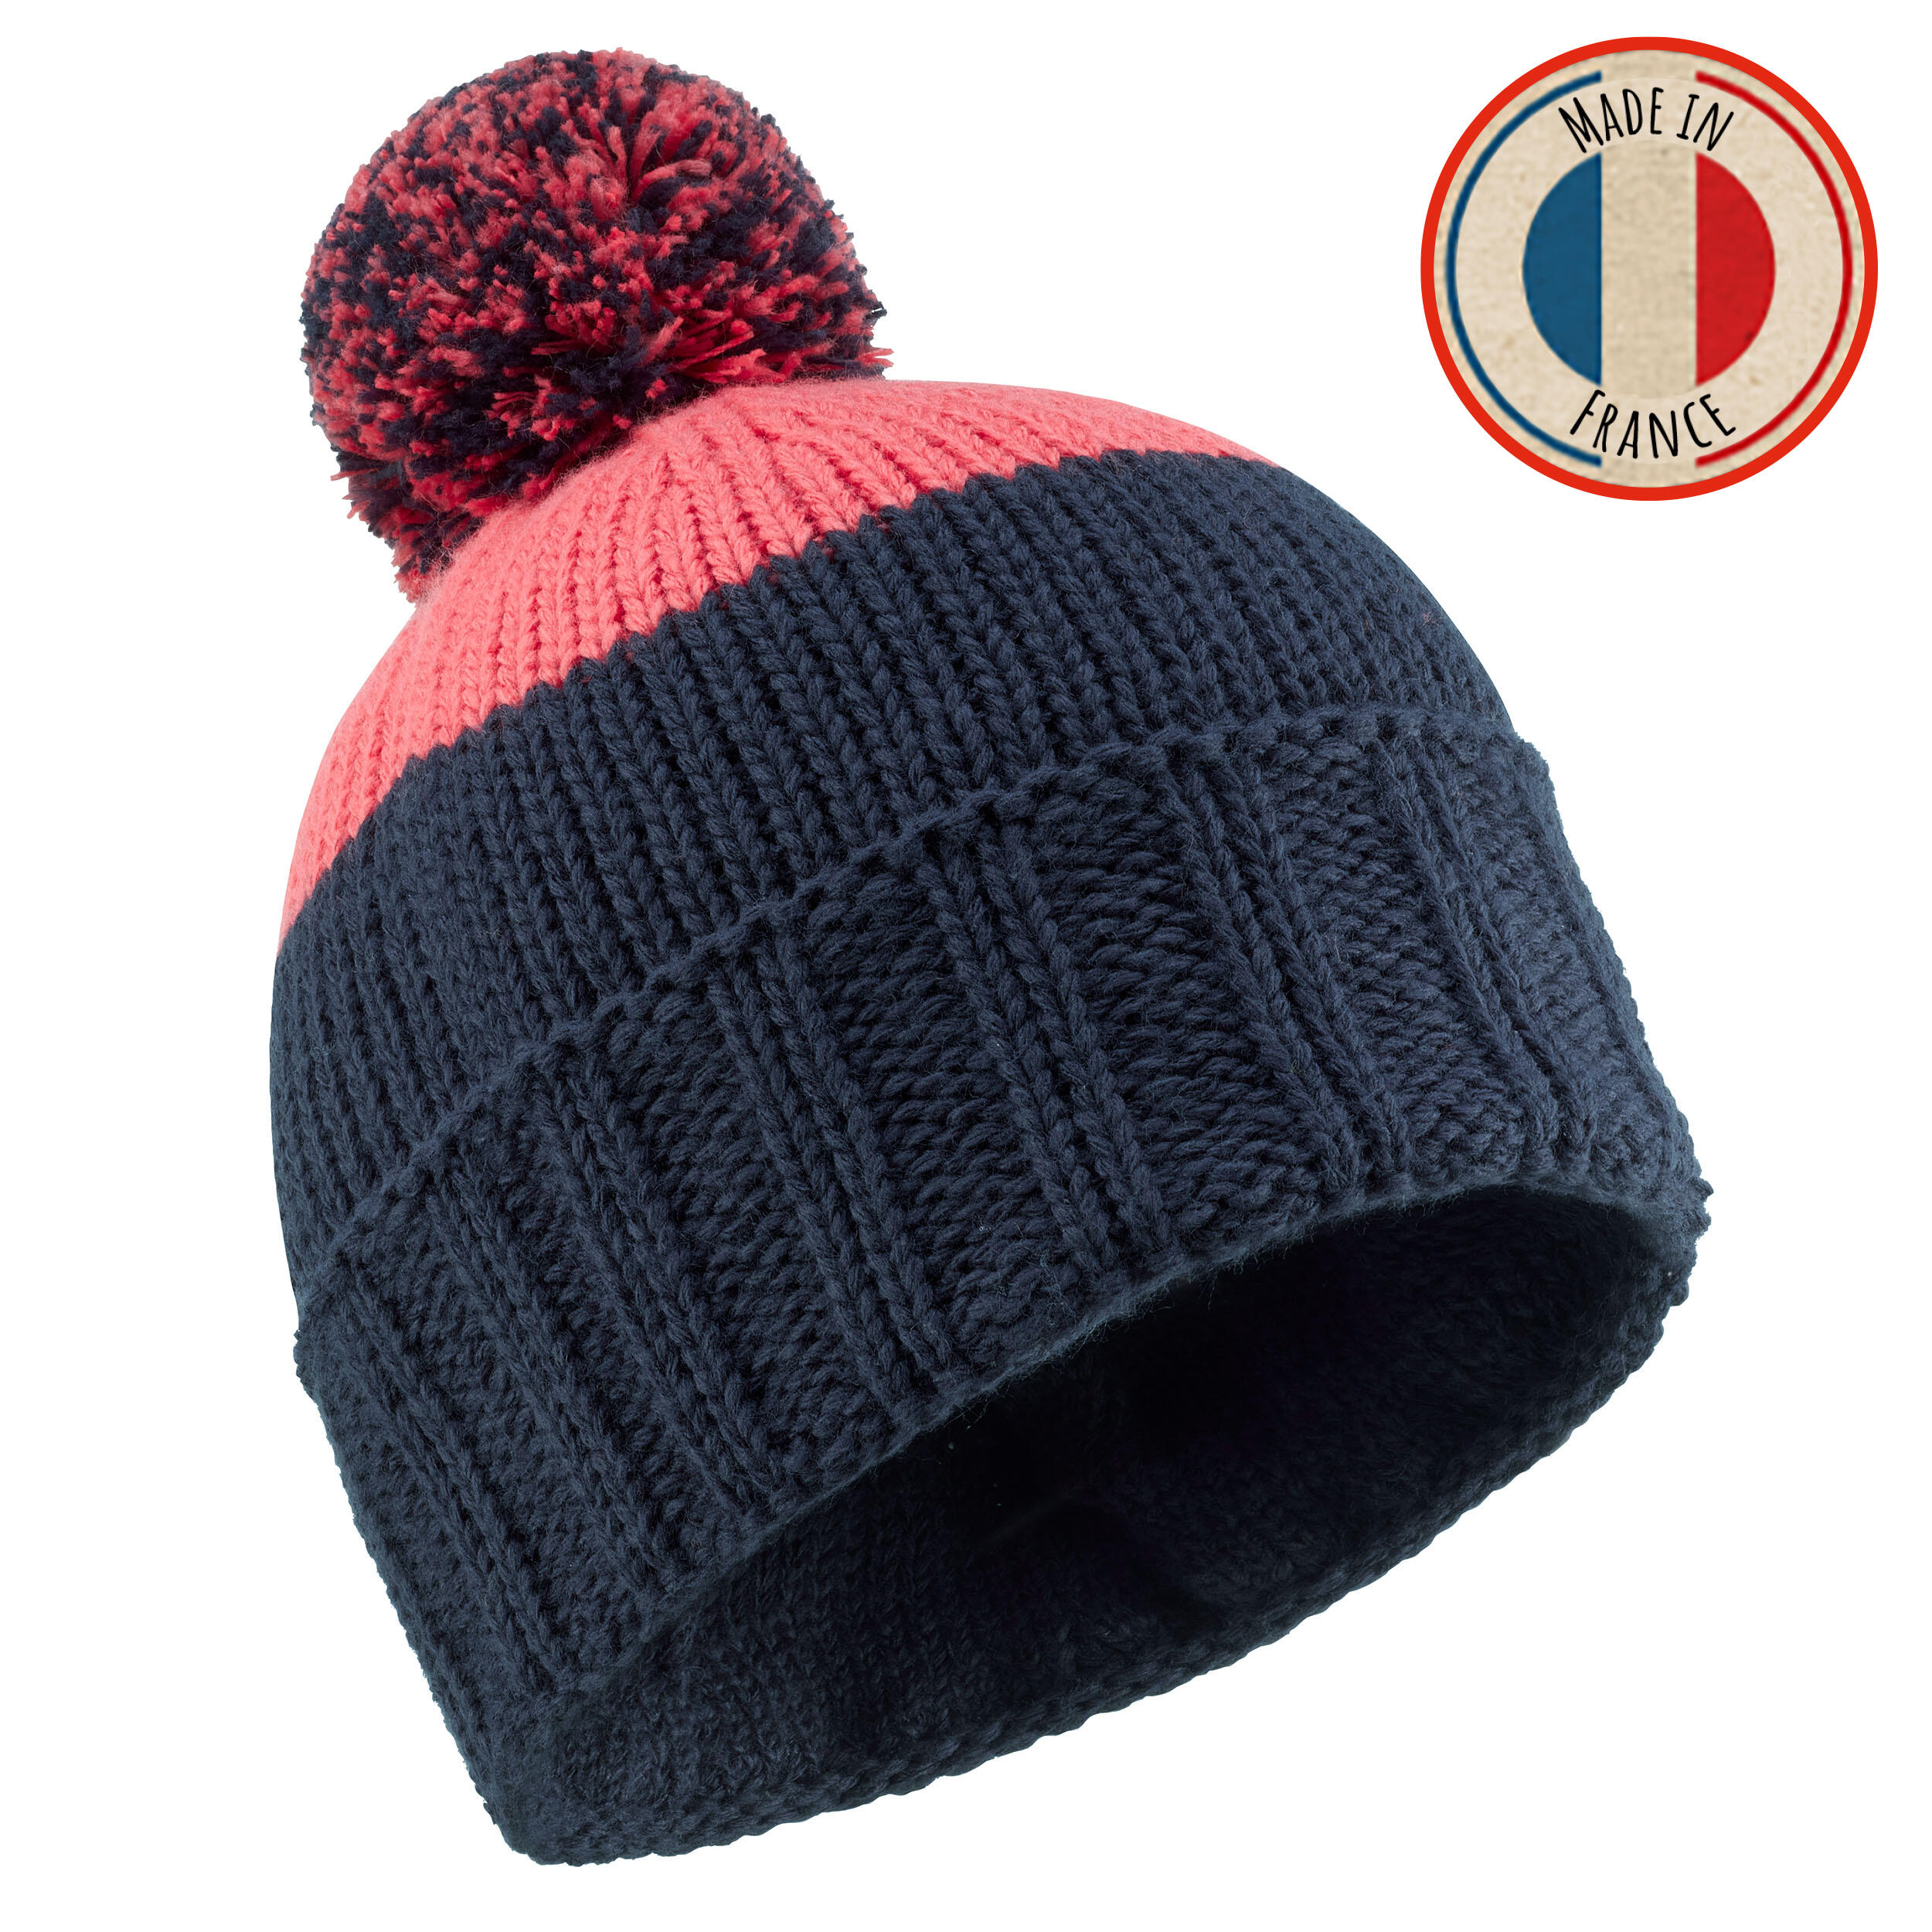 WEDZE Adult Ski Hat Grand Nord Made In France - Navy Blue-Pink